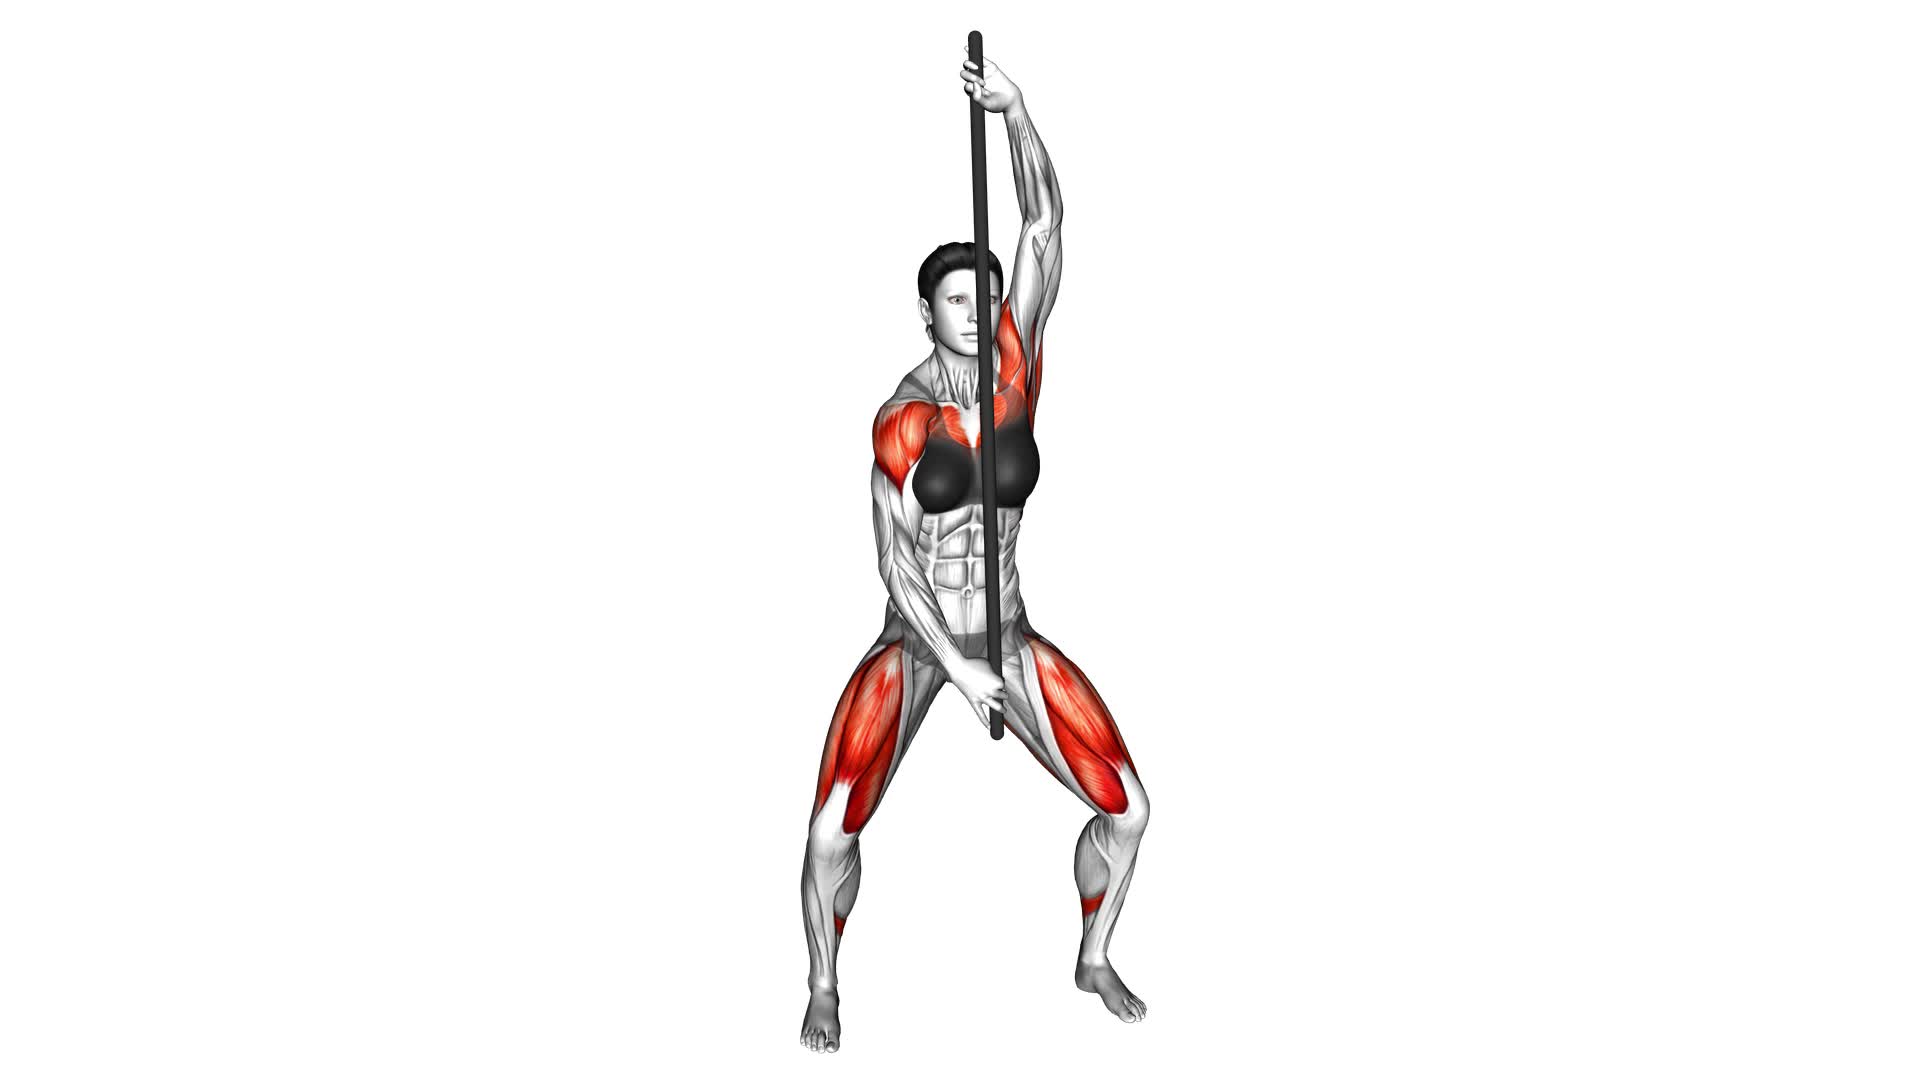 Stick Shoulders Stretch (female) - Video Exercise Guide & Tips